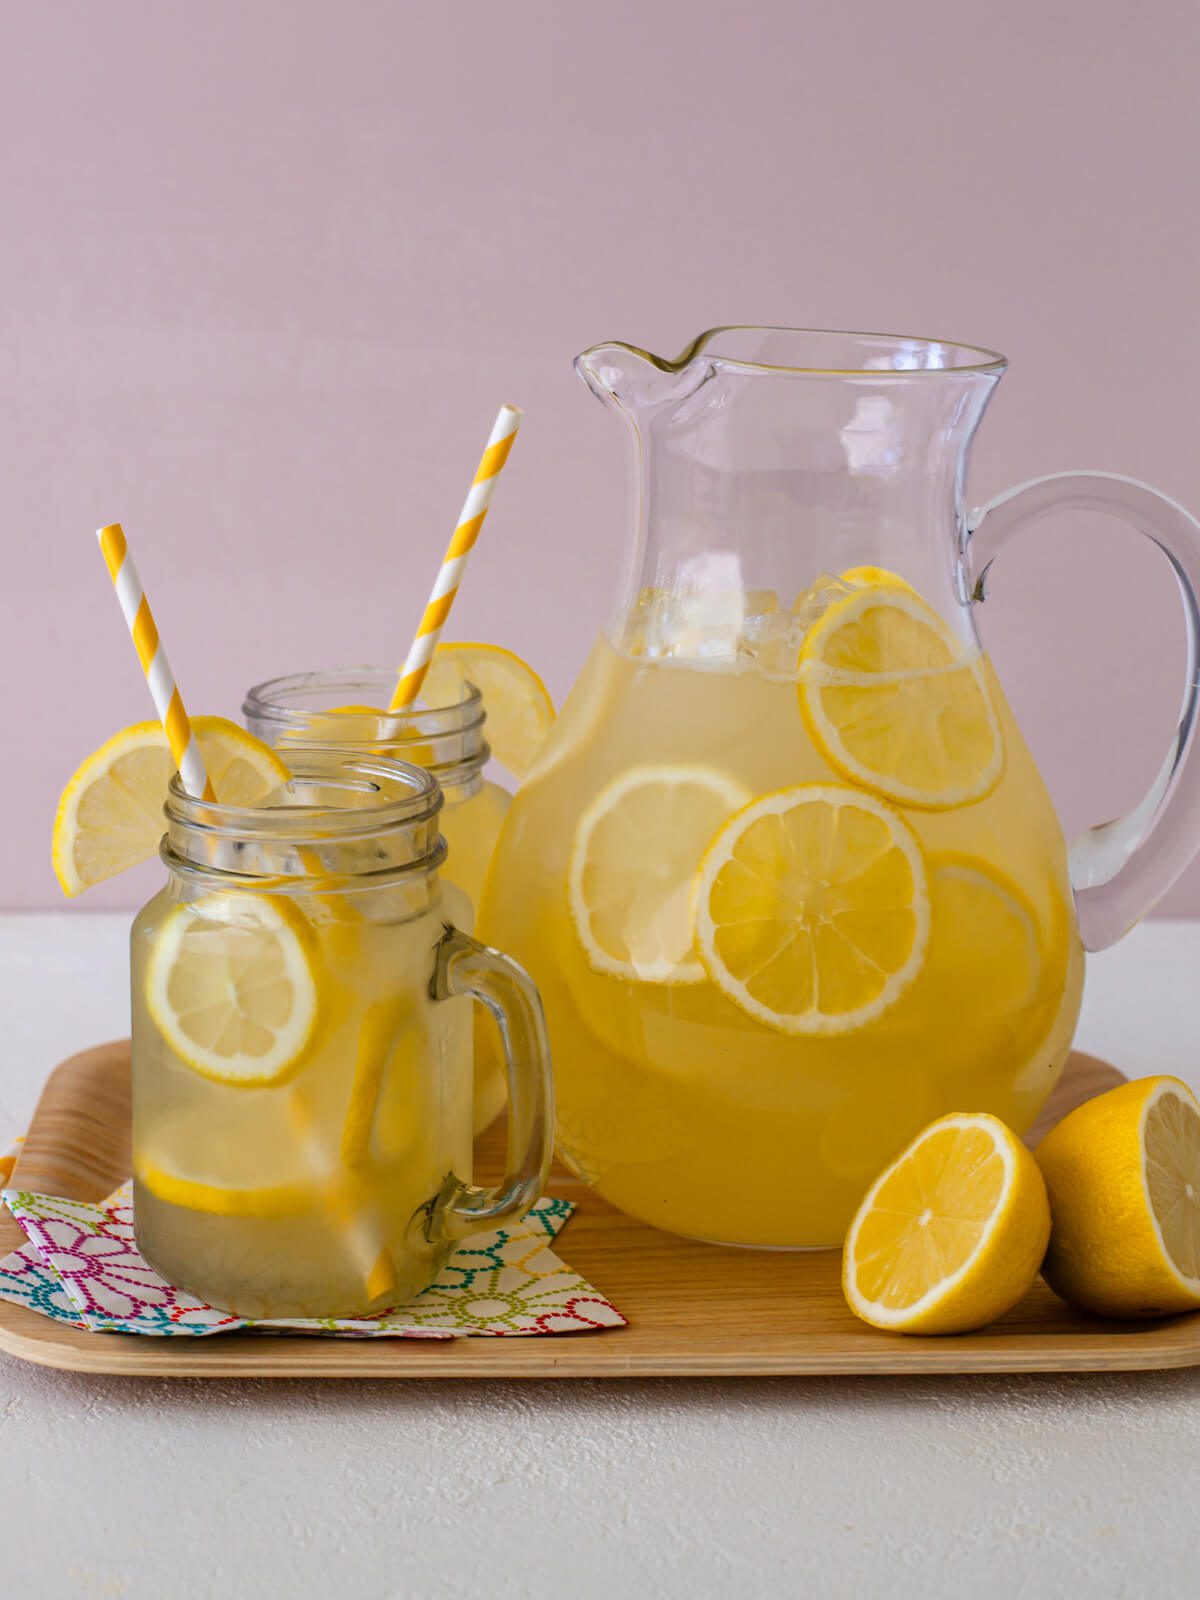 clear mugs of lemonade with straws and lemon slices and a pitcher of homemade lemonade